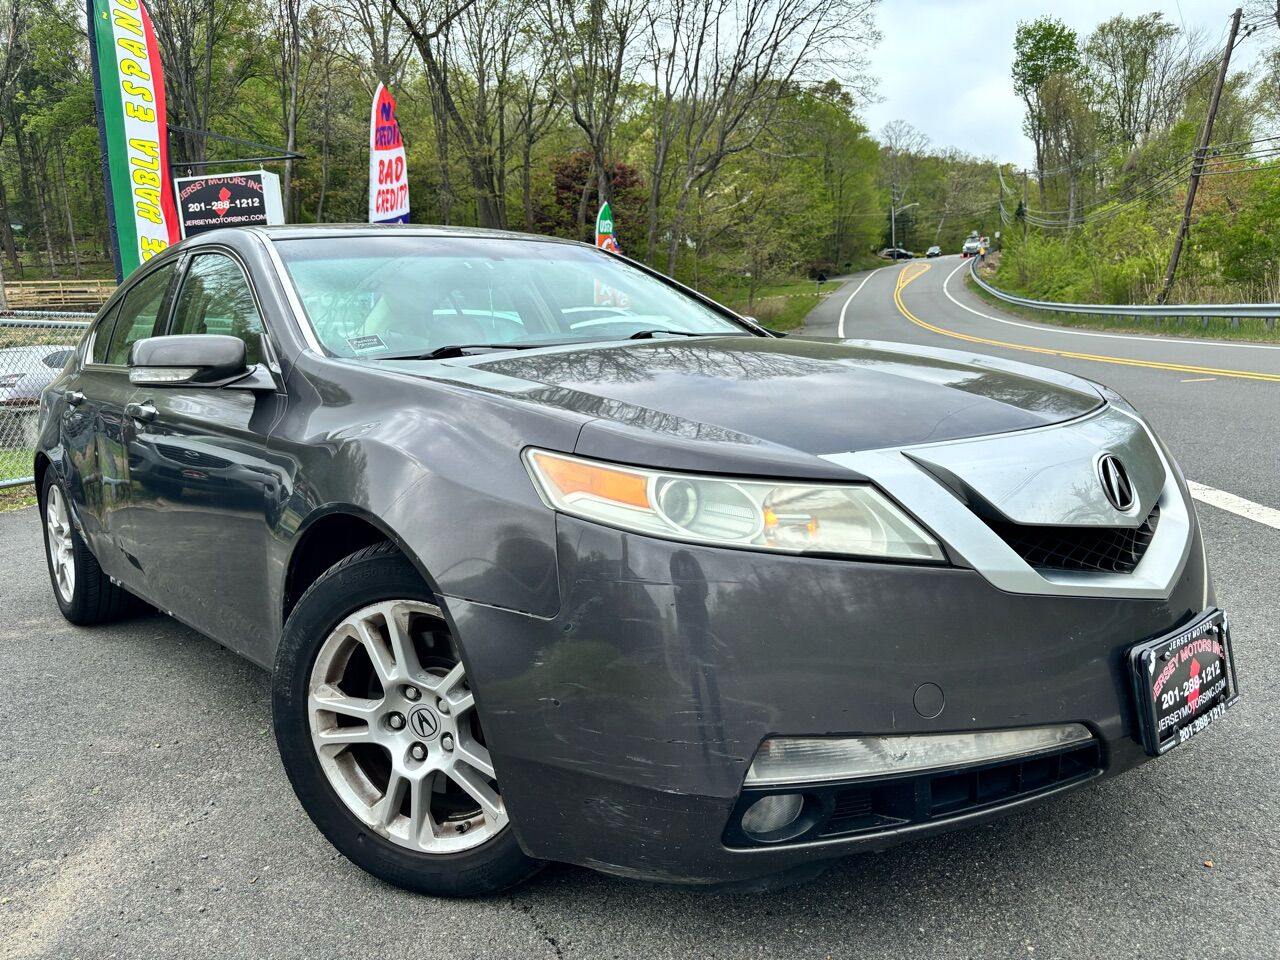 Acura TL FWD with Technology Package